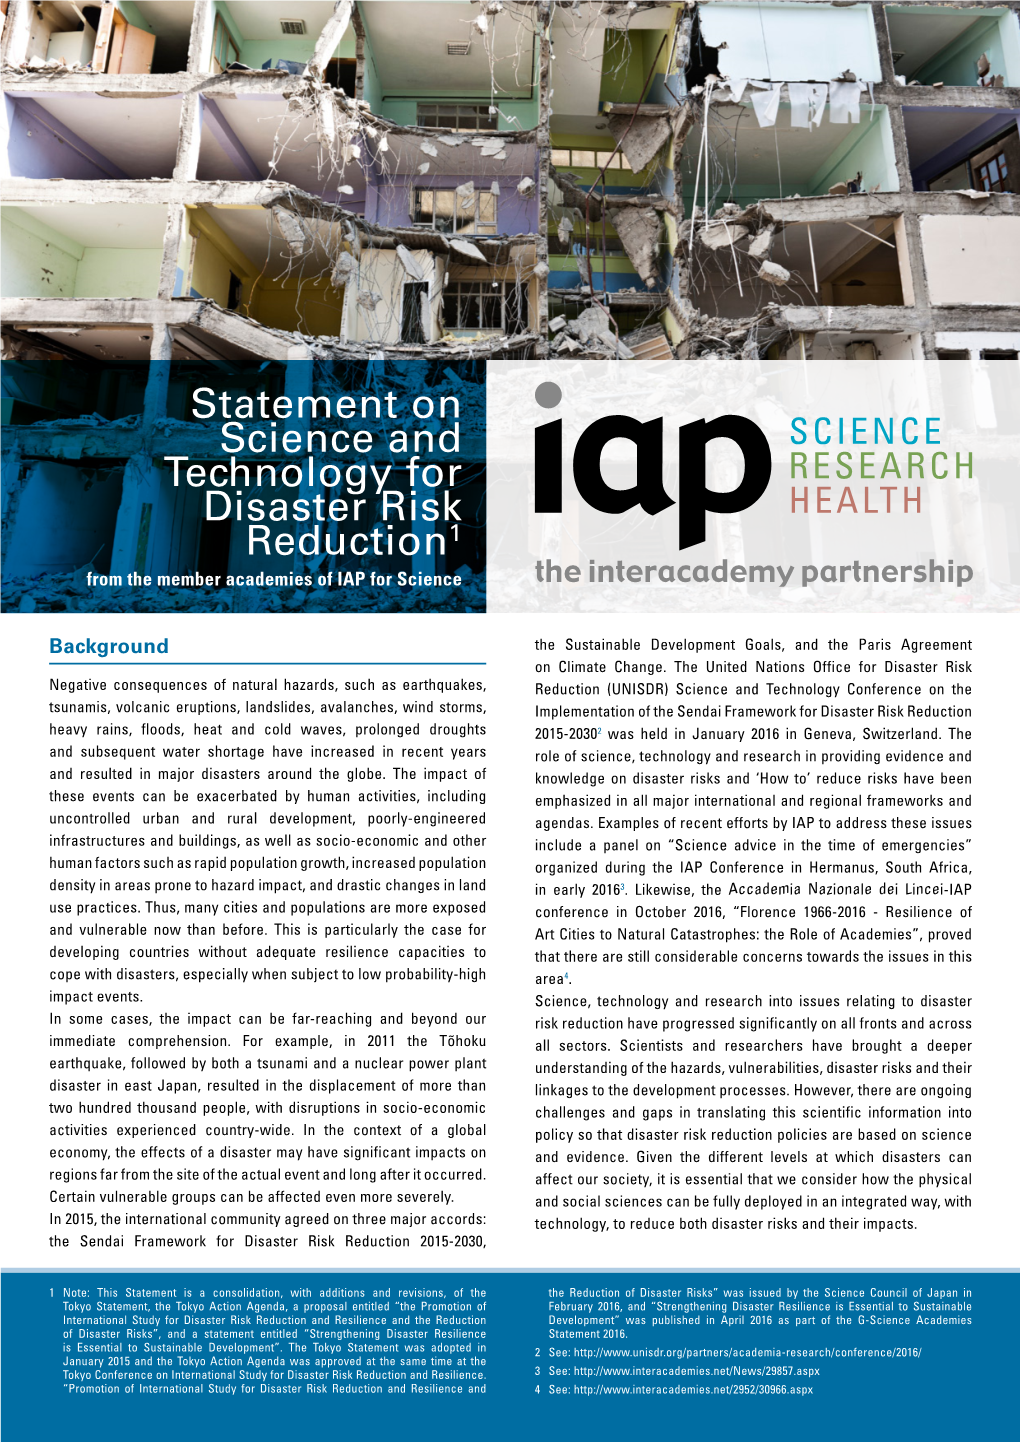 Statement on Science and Technology for Disaster Risk Reduction1 from the Member Academies of IAP for Science